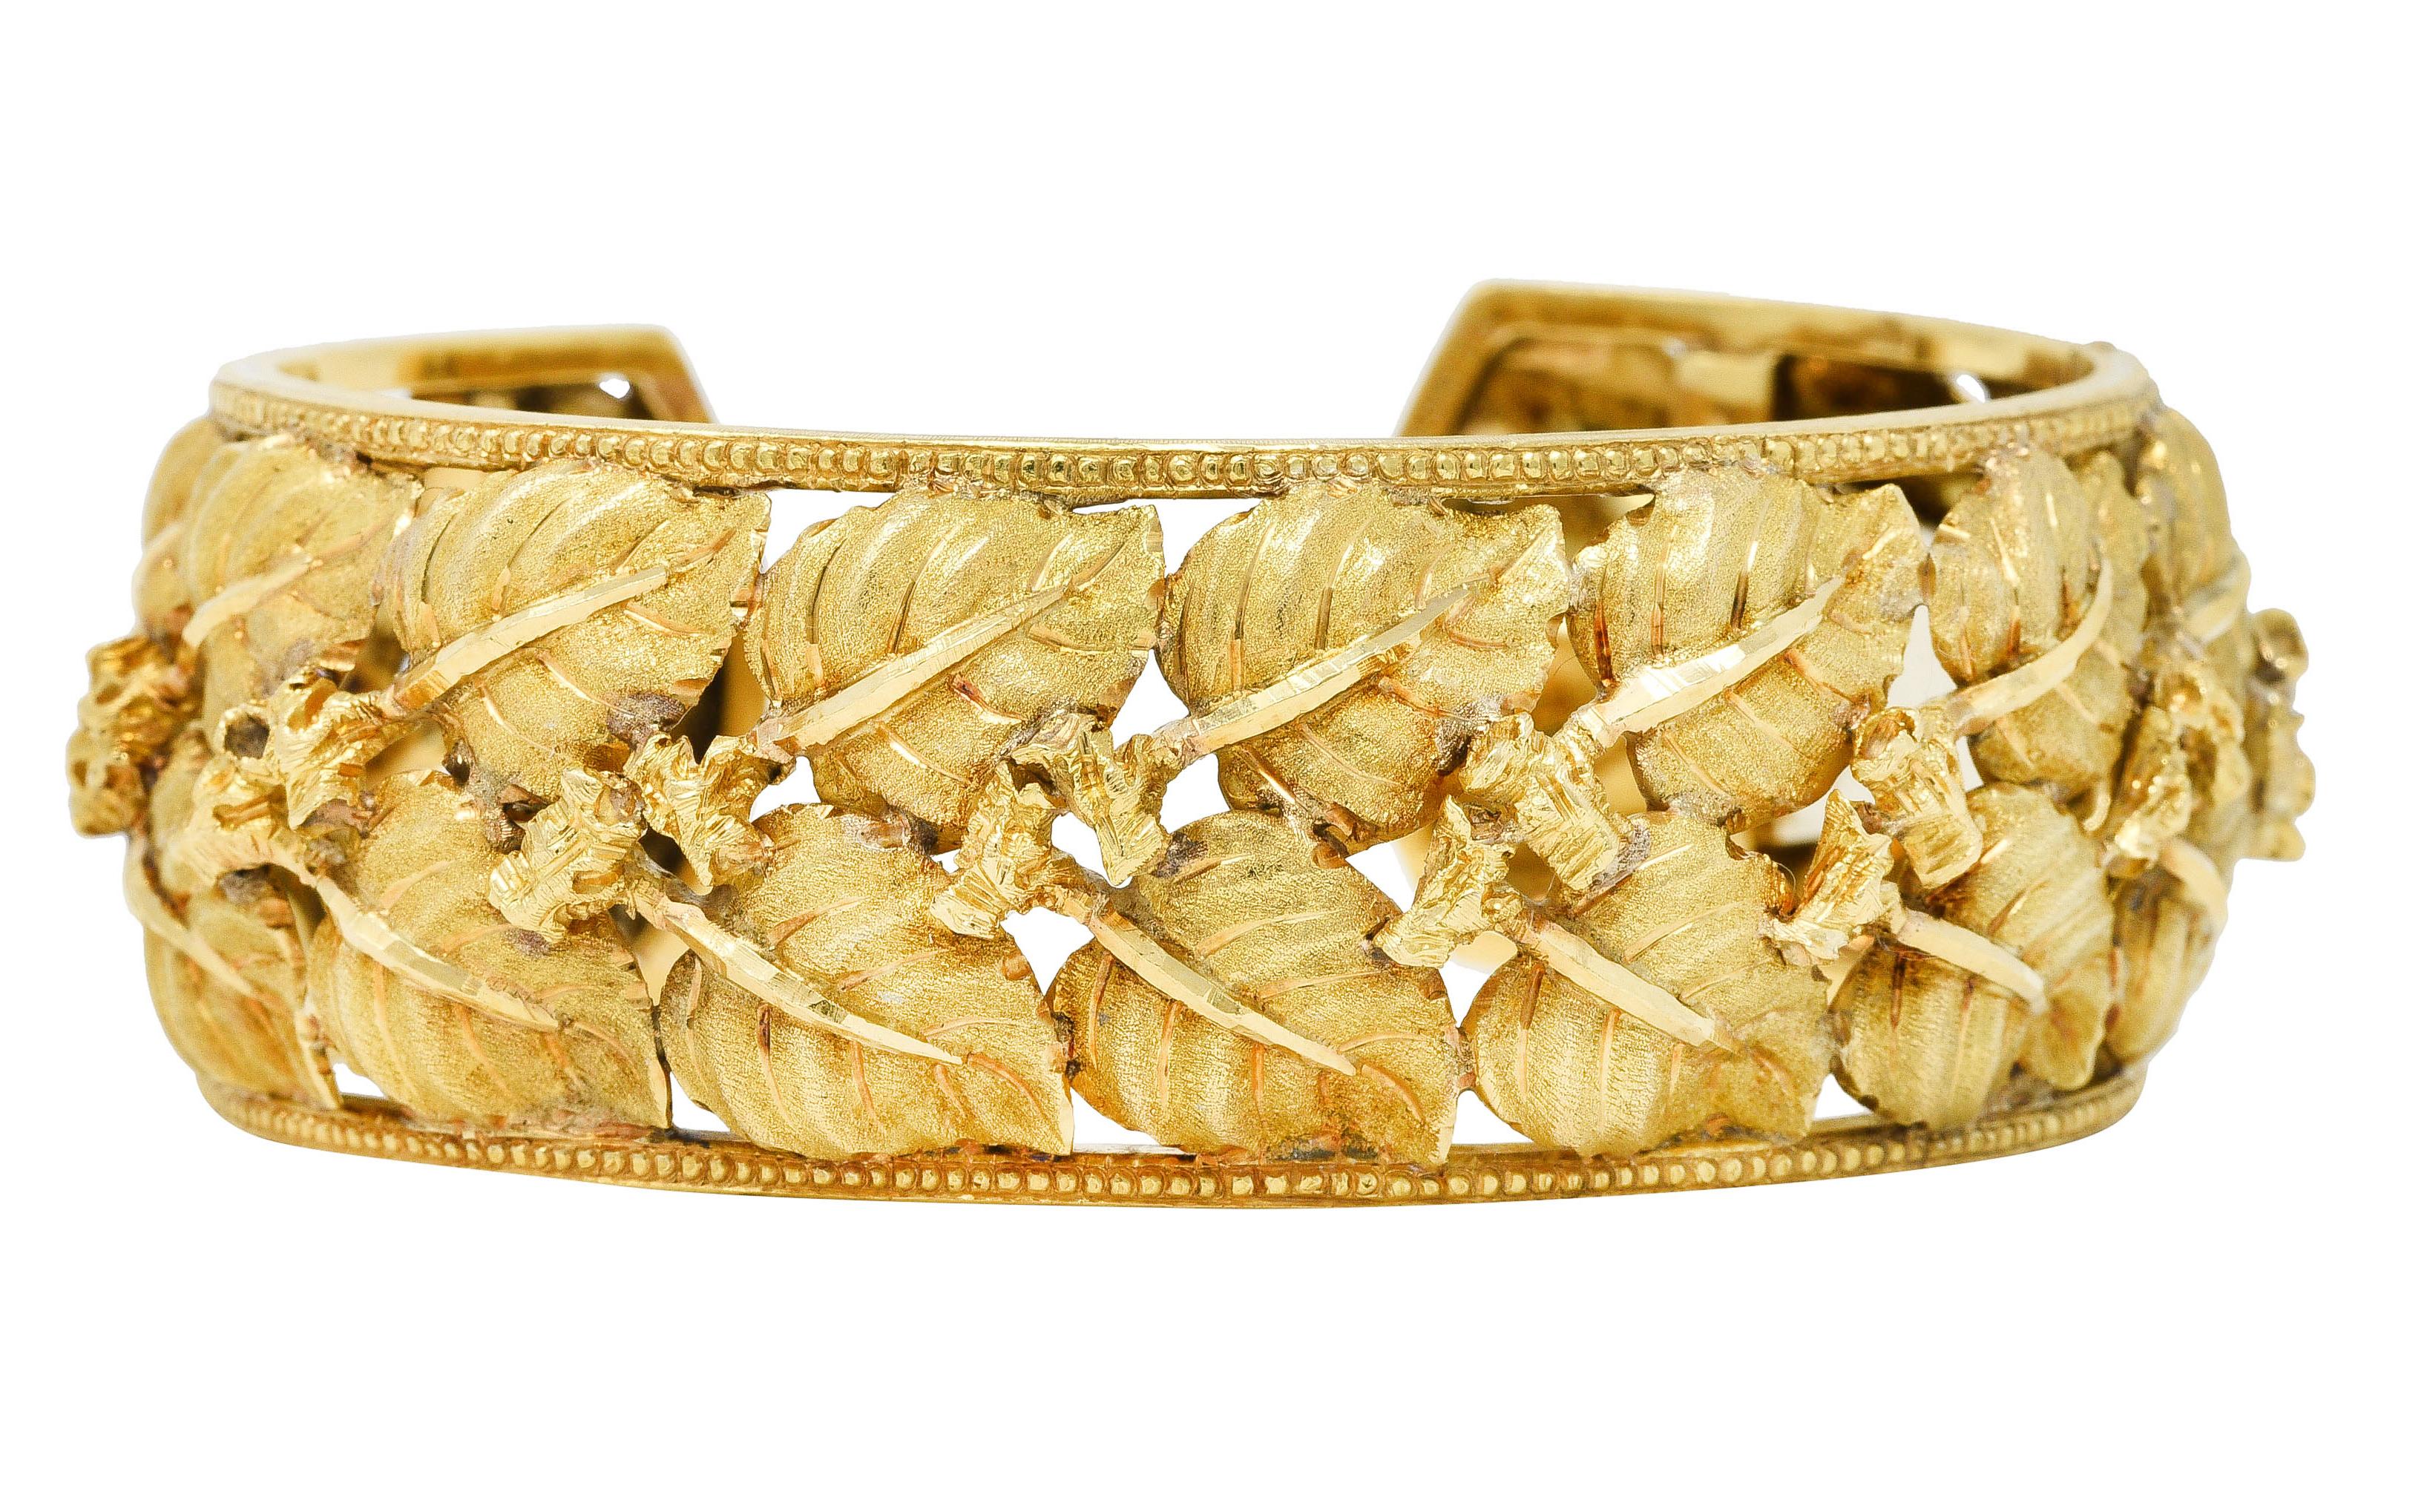 Cuff style bracelet designed with highly stylized birch leaf motif and textured gold 

Centering two rows of textured leaves with high polished veins branching from knotted twig segments

Framed by milgrain edges 

Completed by hinged end

Stamped